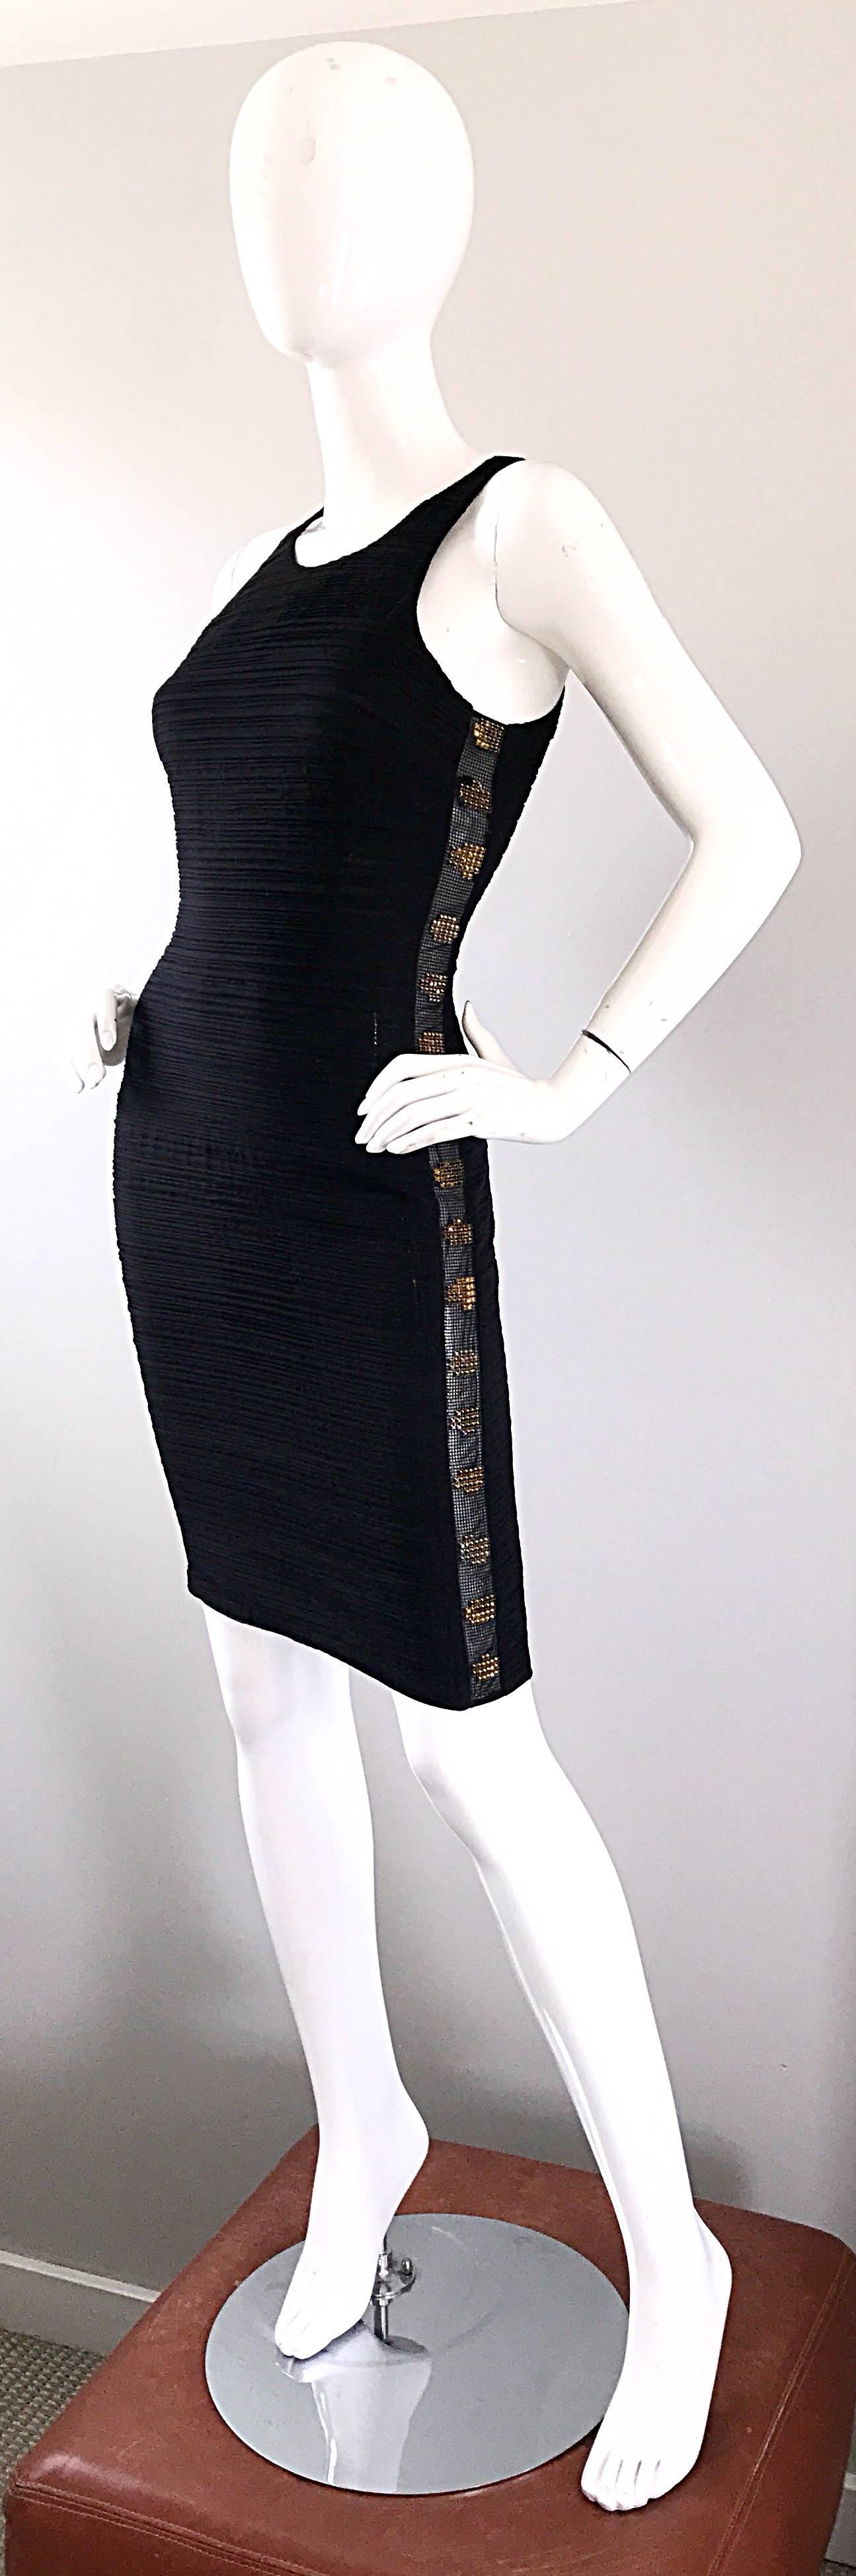 Sexy early 2000s GIANNI VERSACE black silk bodcon dress! Features a cut-out mesh panel encrusted with golden rhinestones down each side of the dress. Flattering cut hugs the body in all the right places. Hidden zipper up the back with hook-and-eye